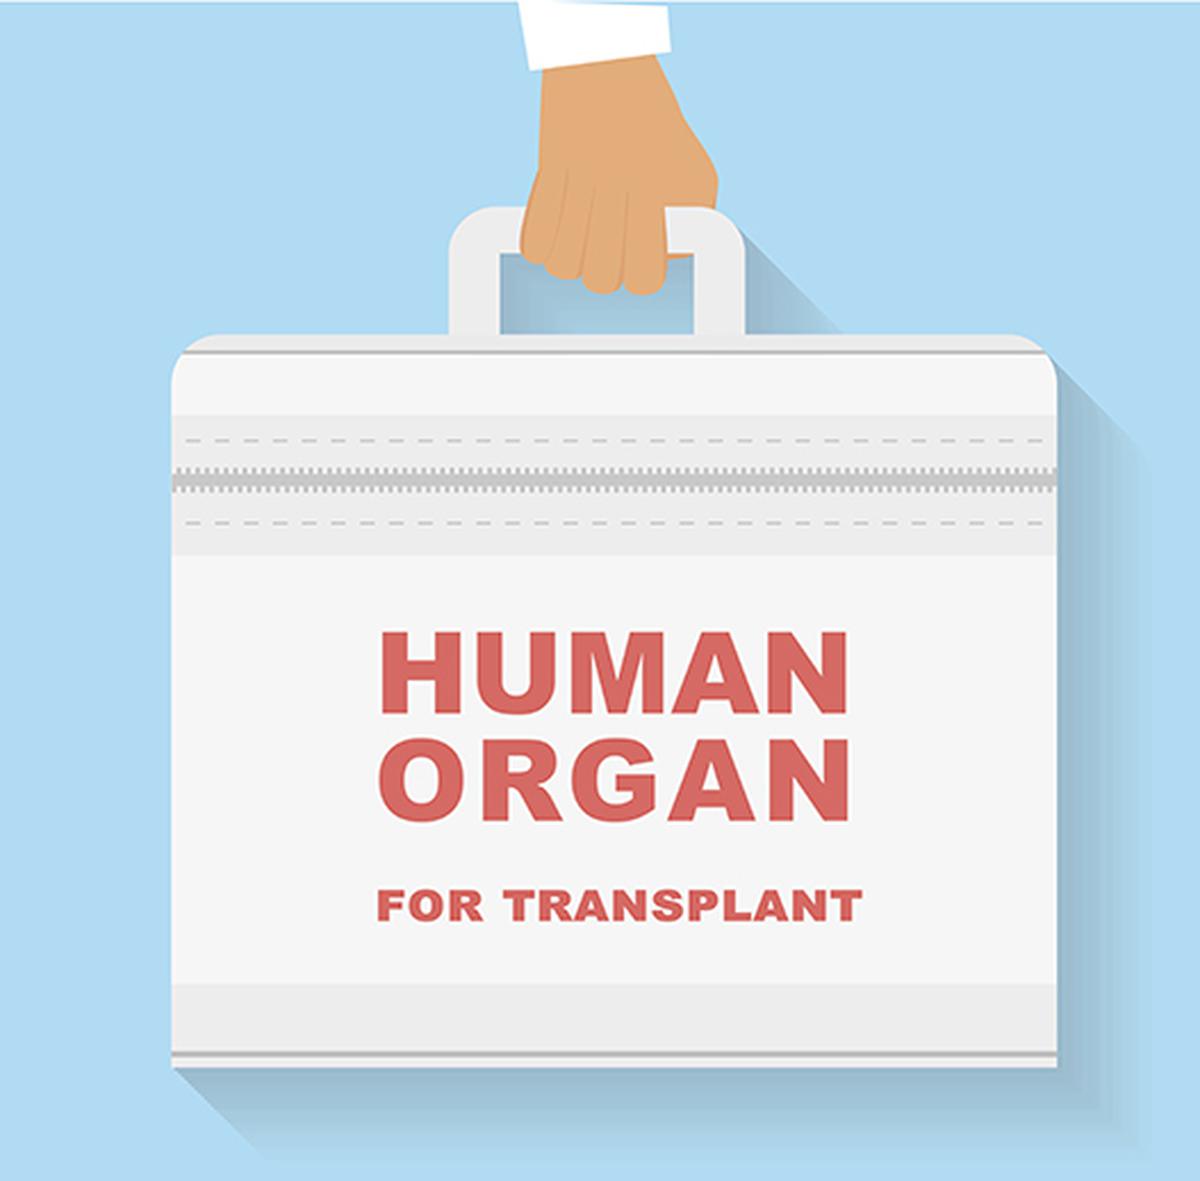 ABO-incompatible organ donors and recipients share their experiences